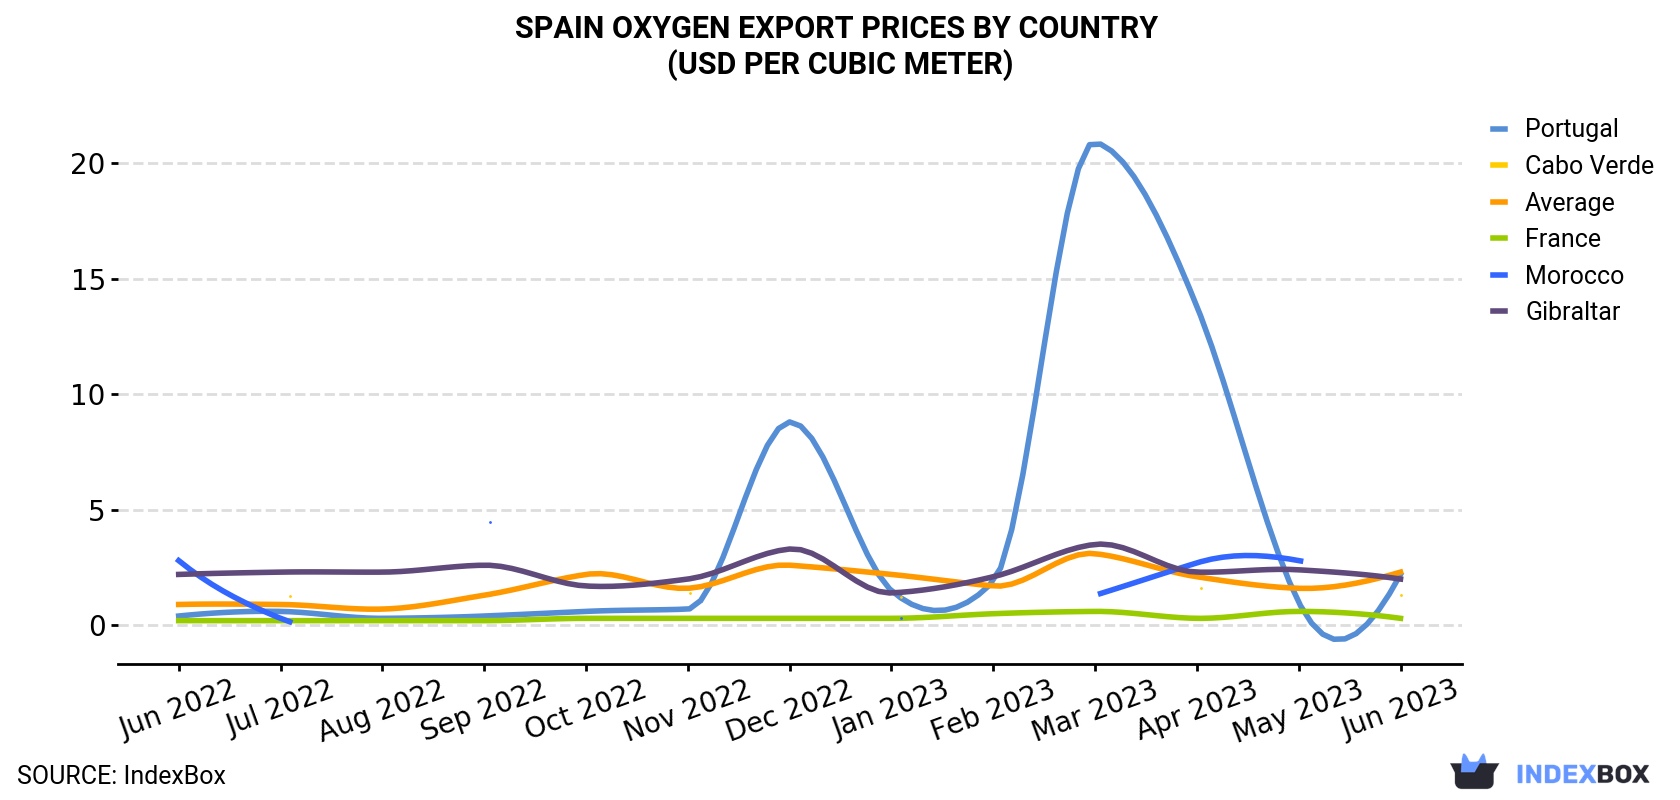 Spain Oxygen Export Prices By Country (USD Per Cubic Meter)